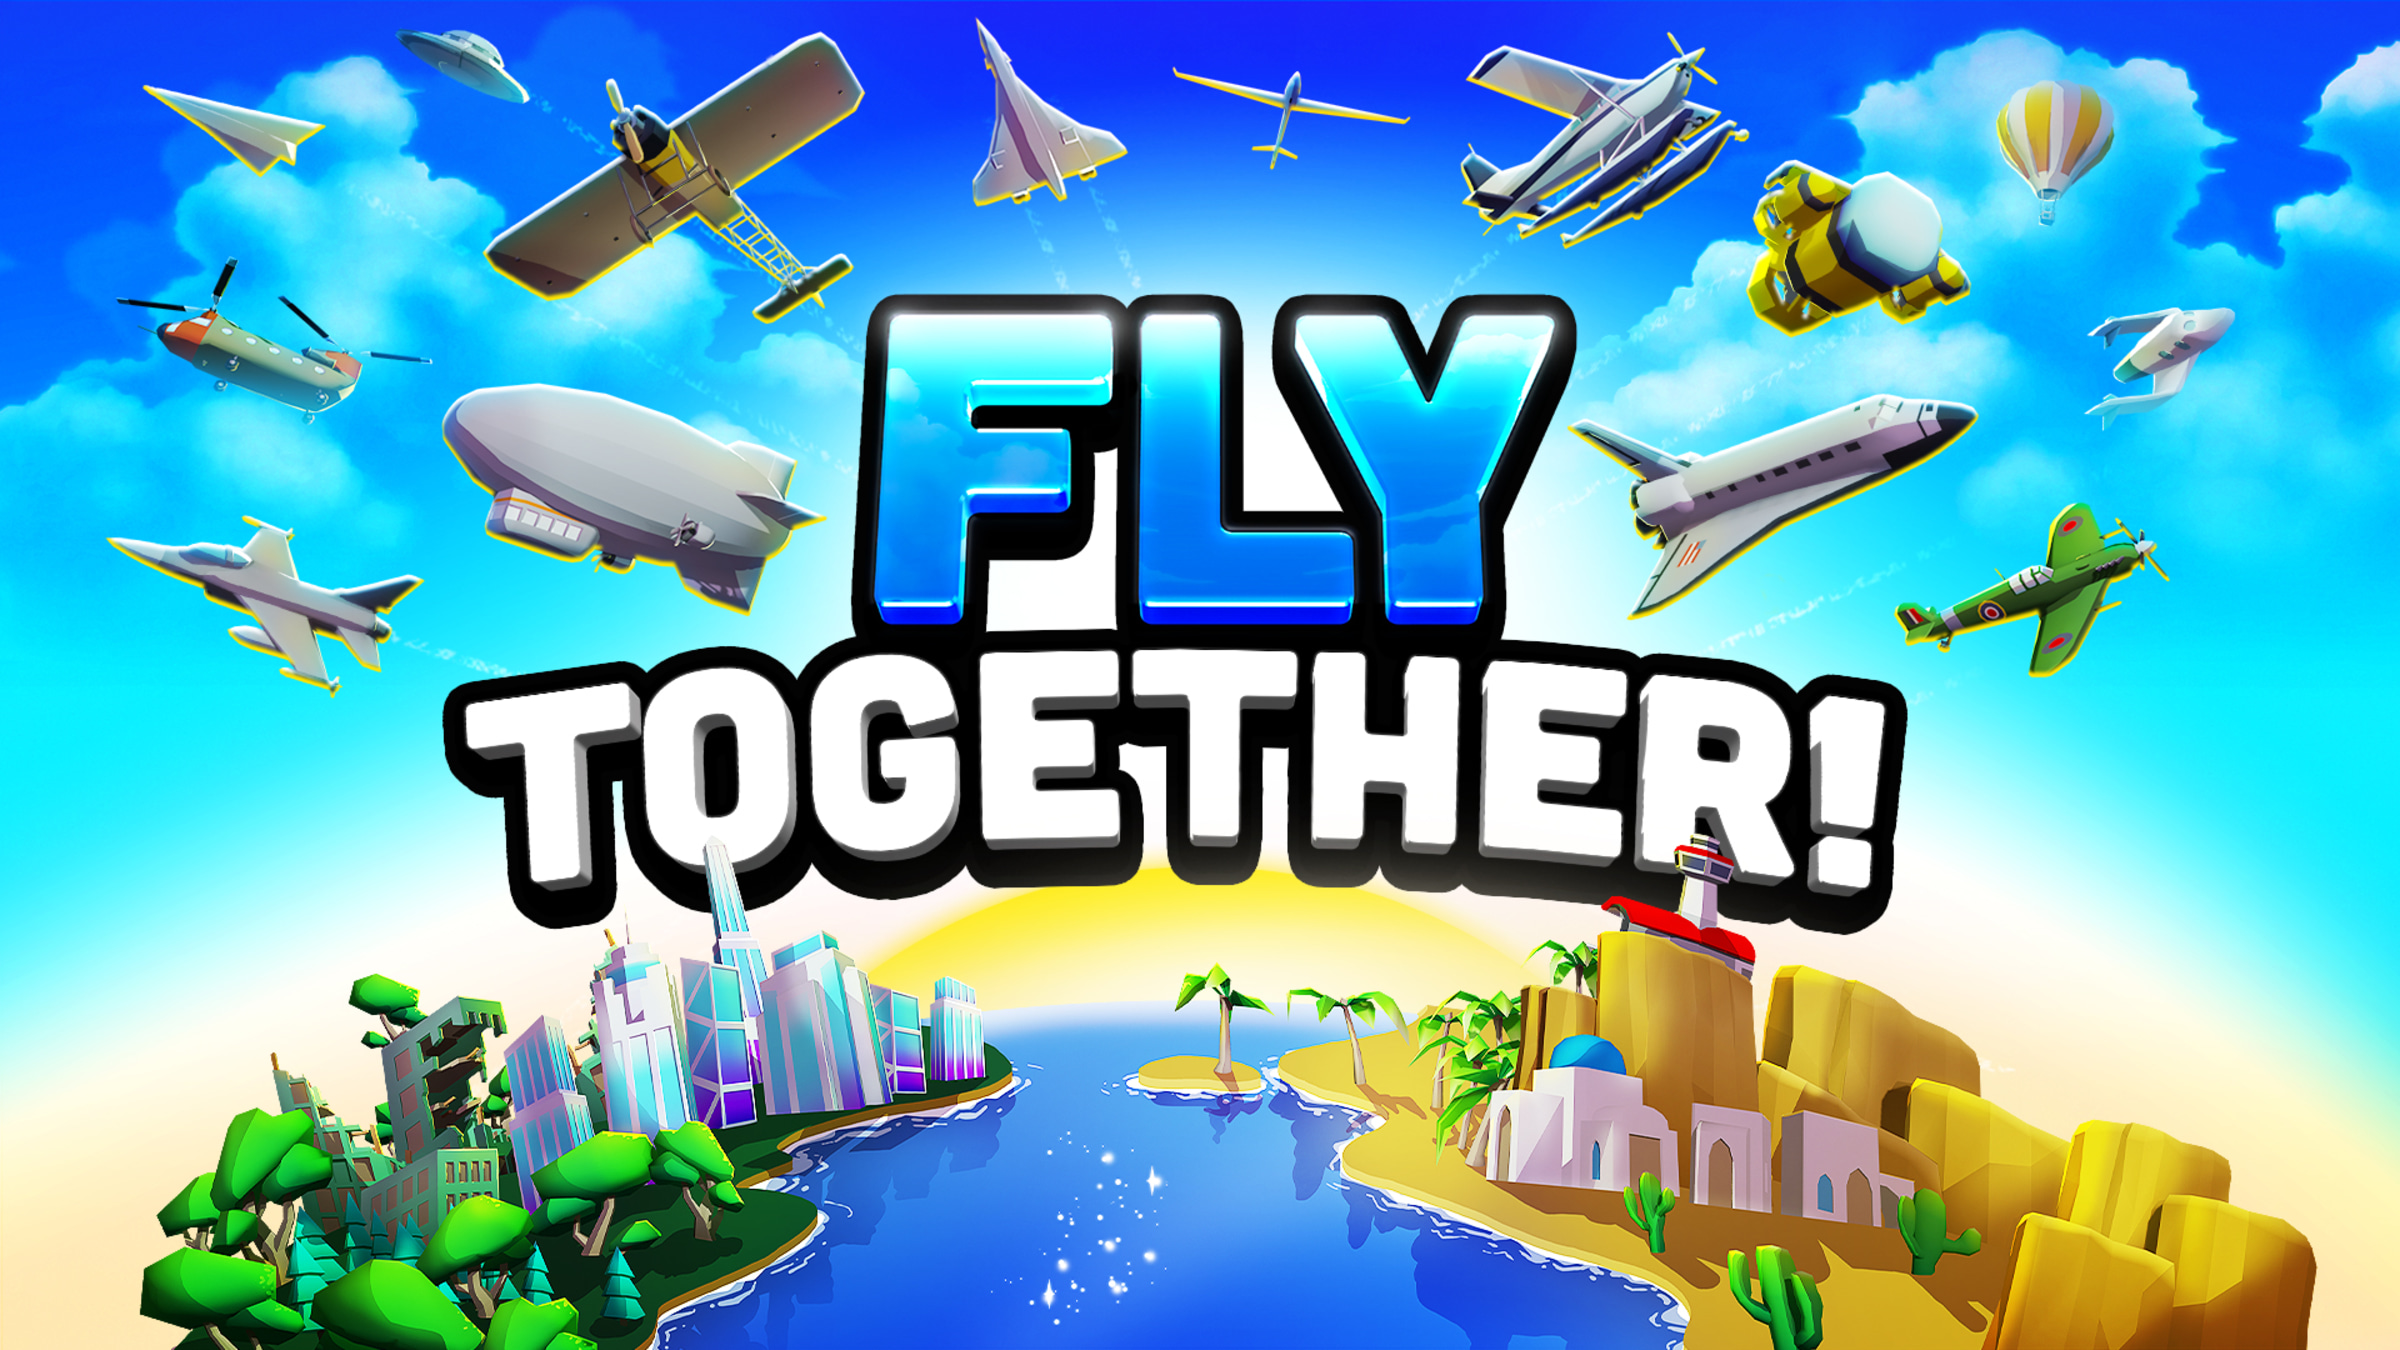 Be a fly game. Игра Fly. Fly together. Игра Fly Switch. Гонки на летающих 2000.